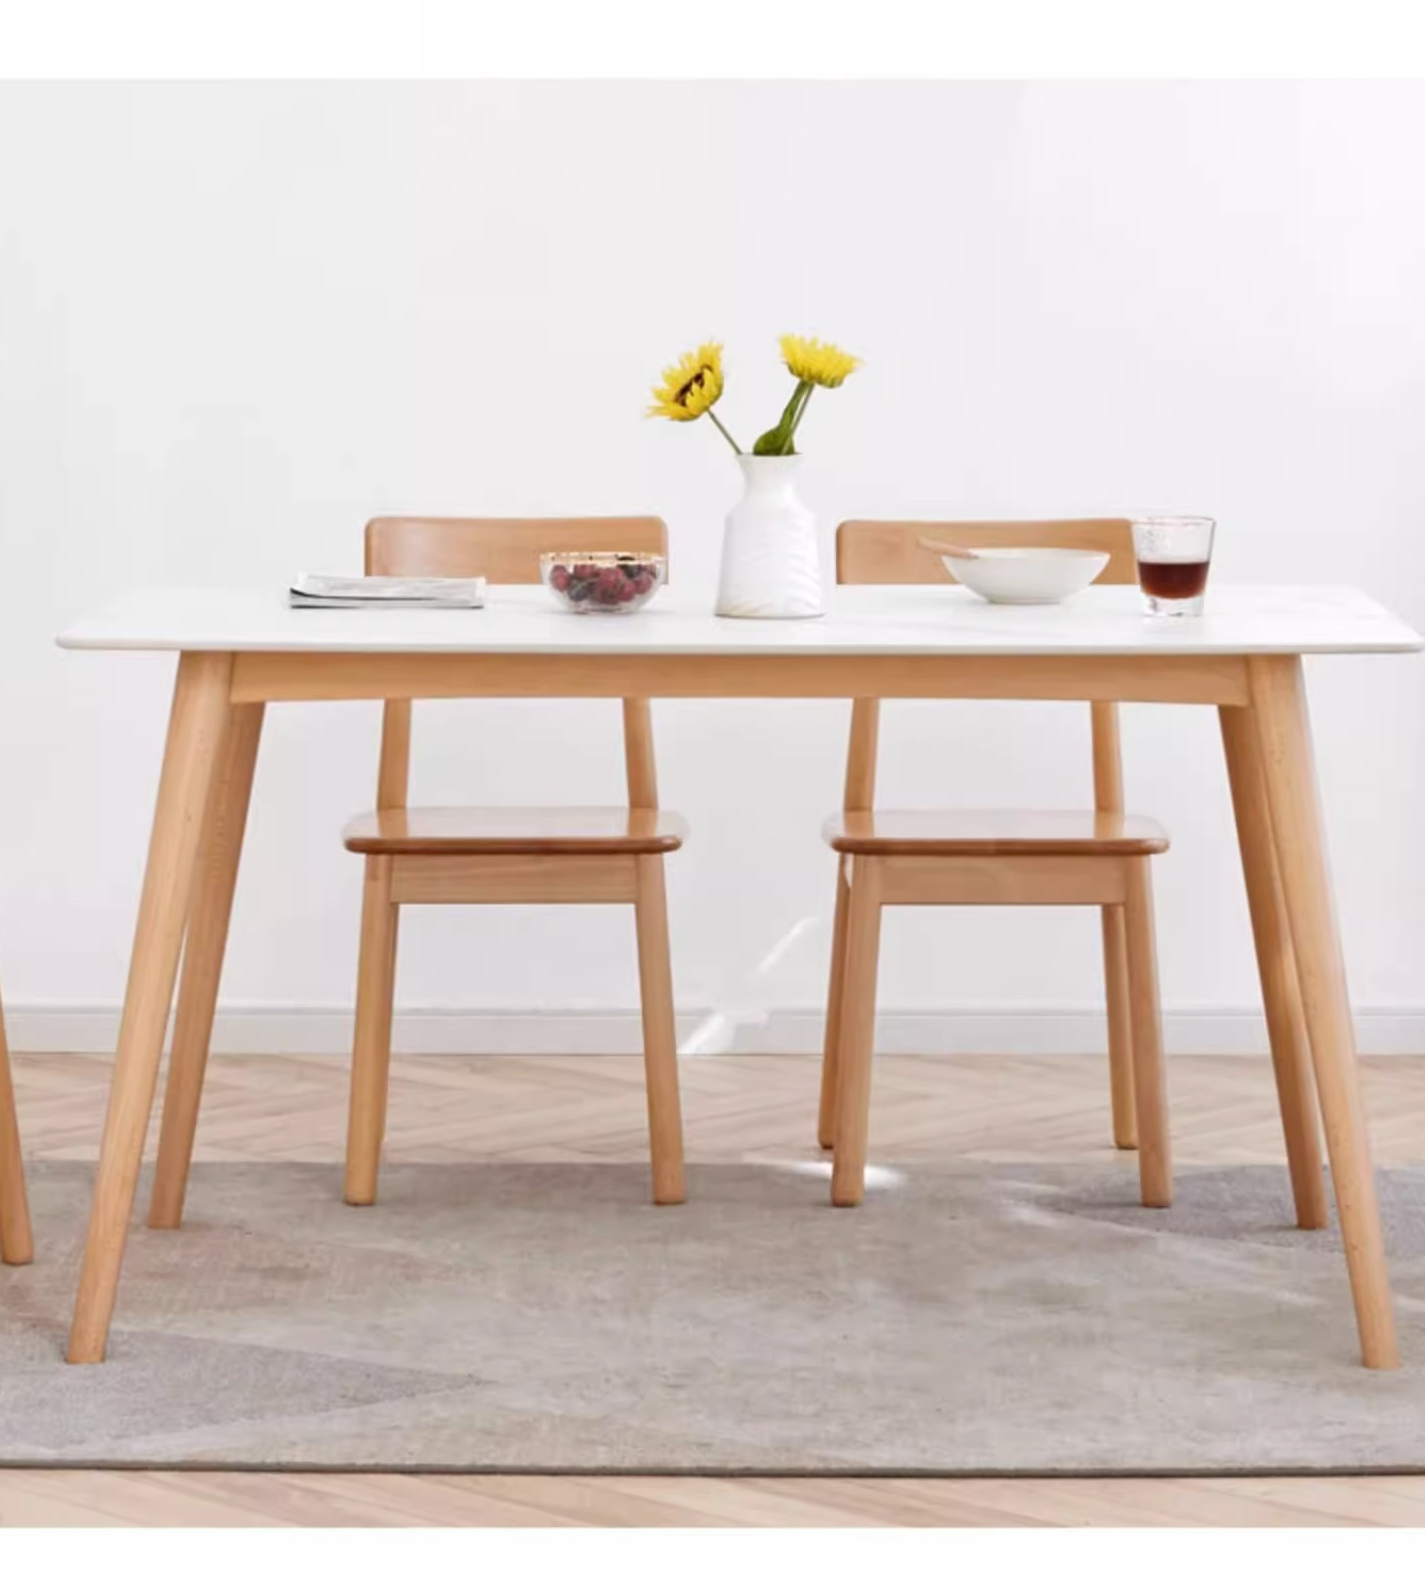 Beech solid wood slate dining table and chairs combination"